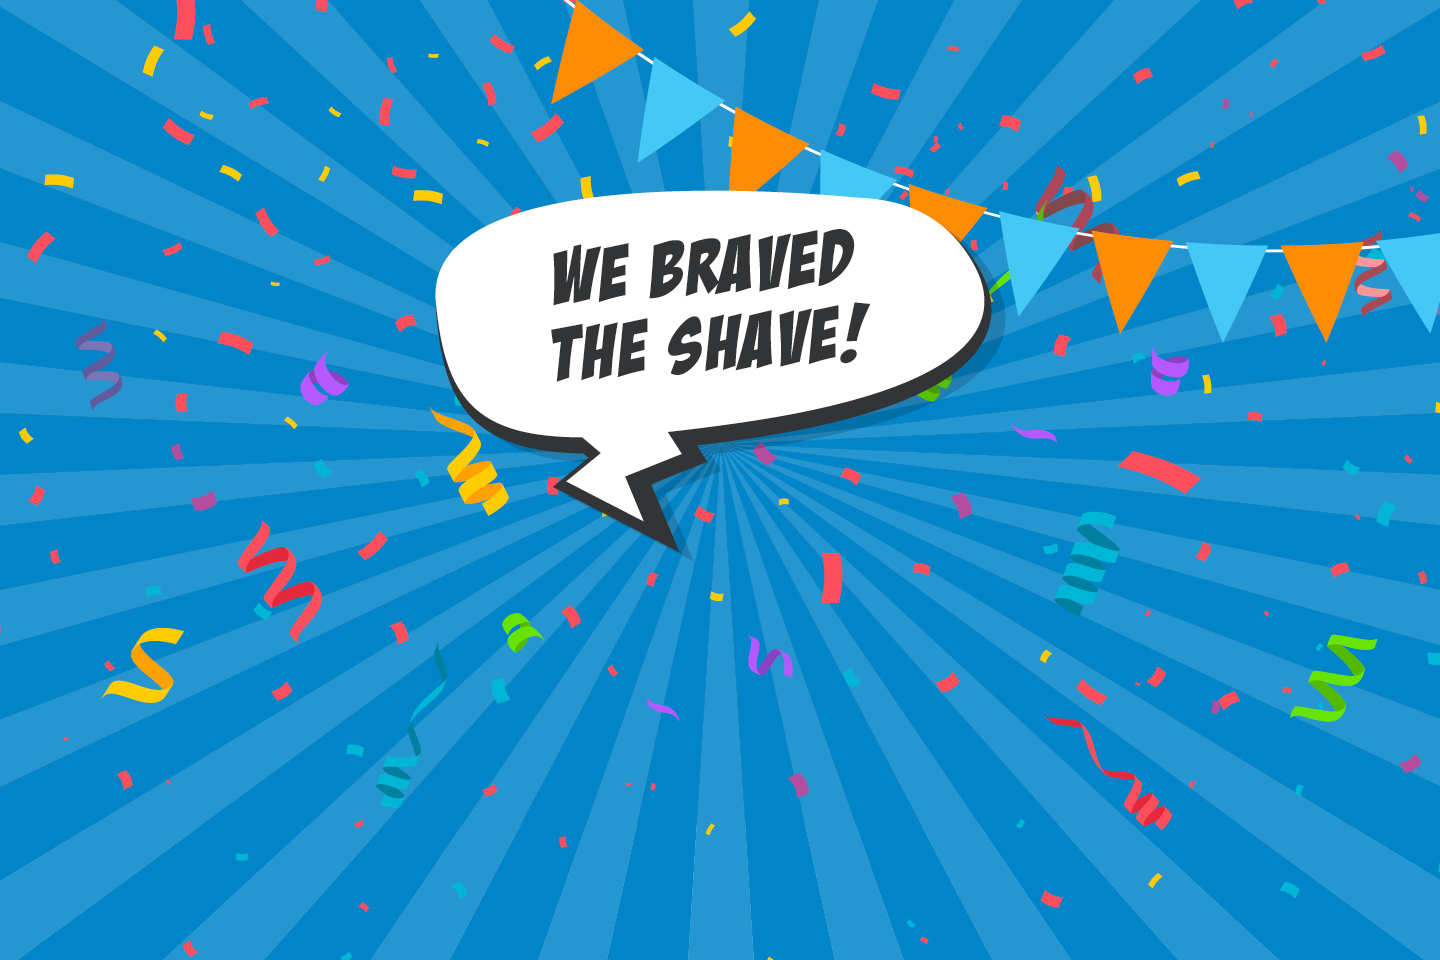 In March, some of the Resimac Group team members participated in the World's Greatest Shave